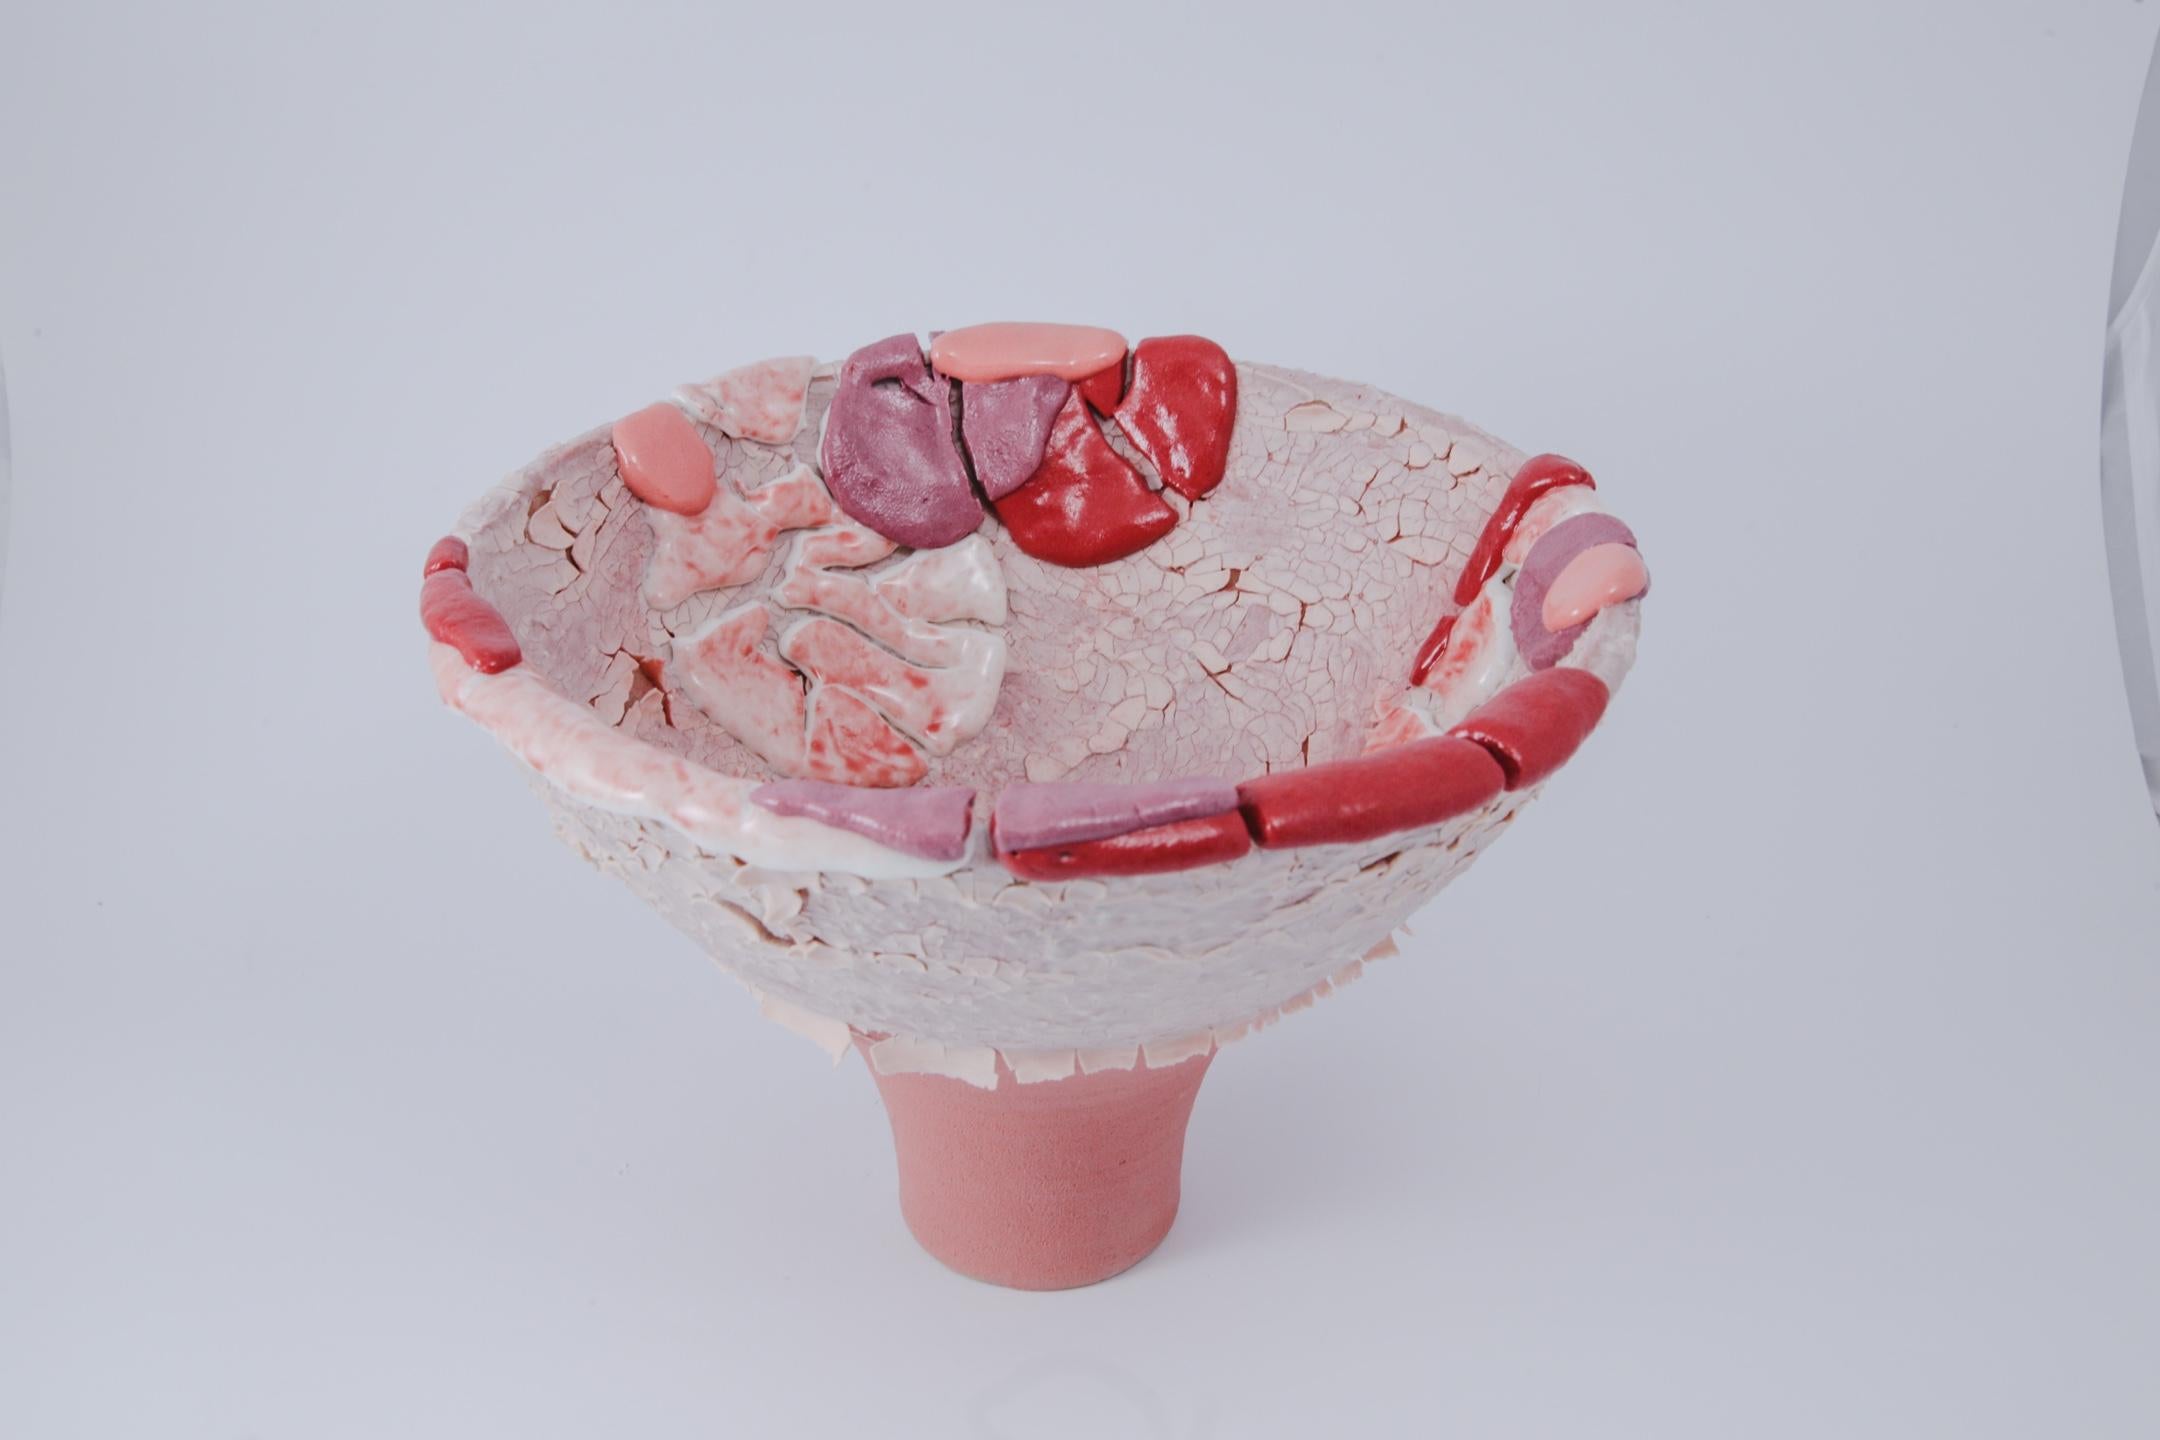 Lipstick Lucie Bowl by Arina Antonova, 2021
Dimensions: H 20 x D 29 cm
Materials: stoneware, porcelain, glaze

Born in Sewastopol (Crimea), I was surrounded by the natural variety of the coastal Black Sea views with rocky beaches and picturesque